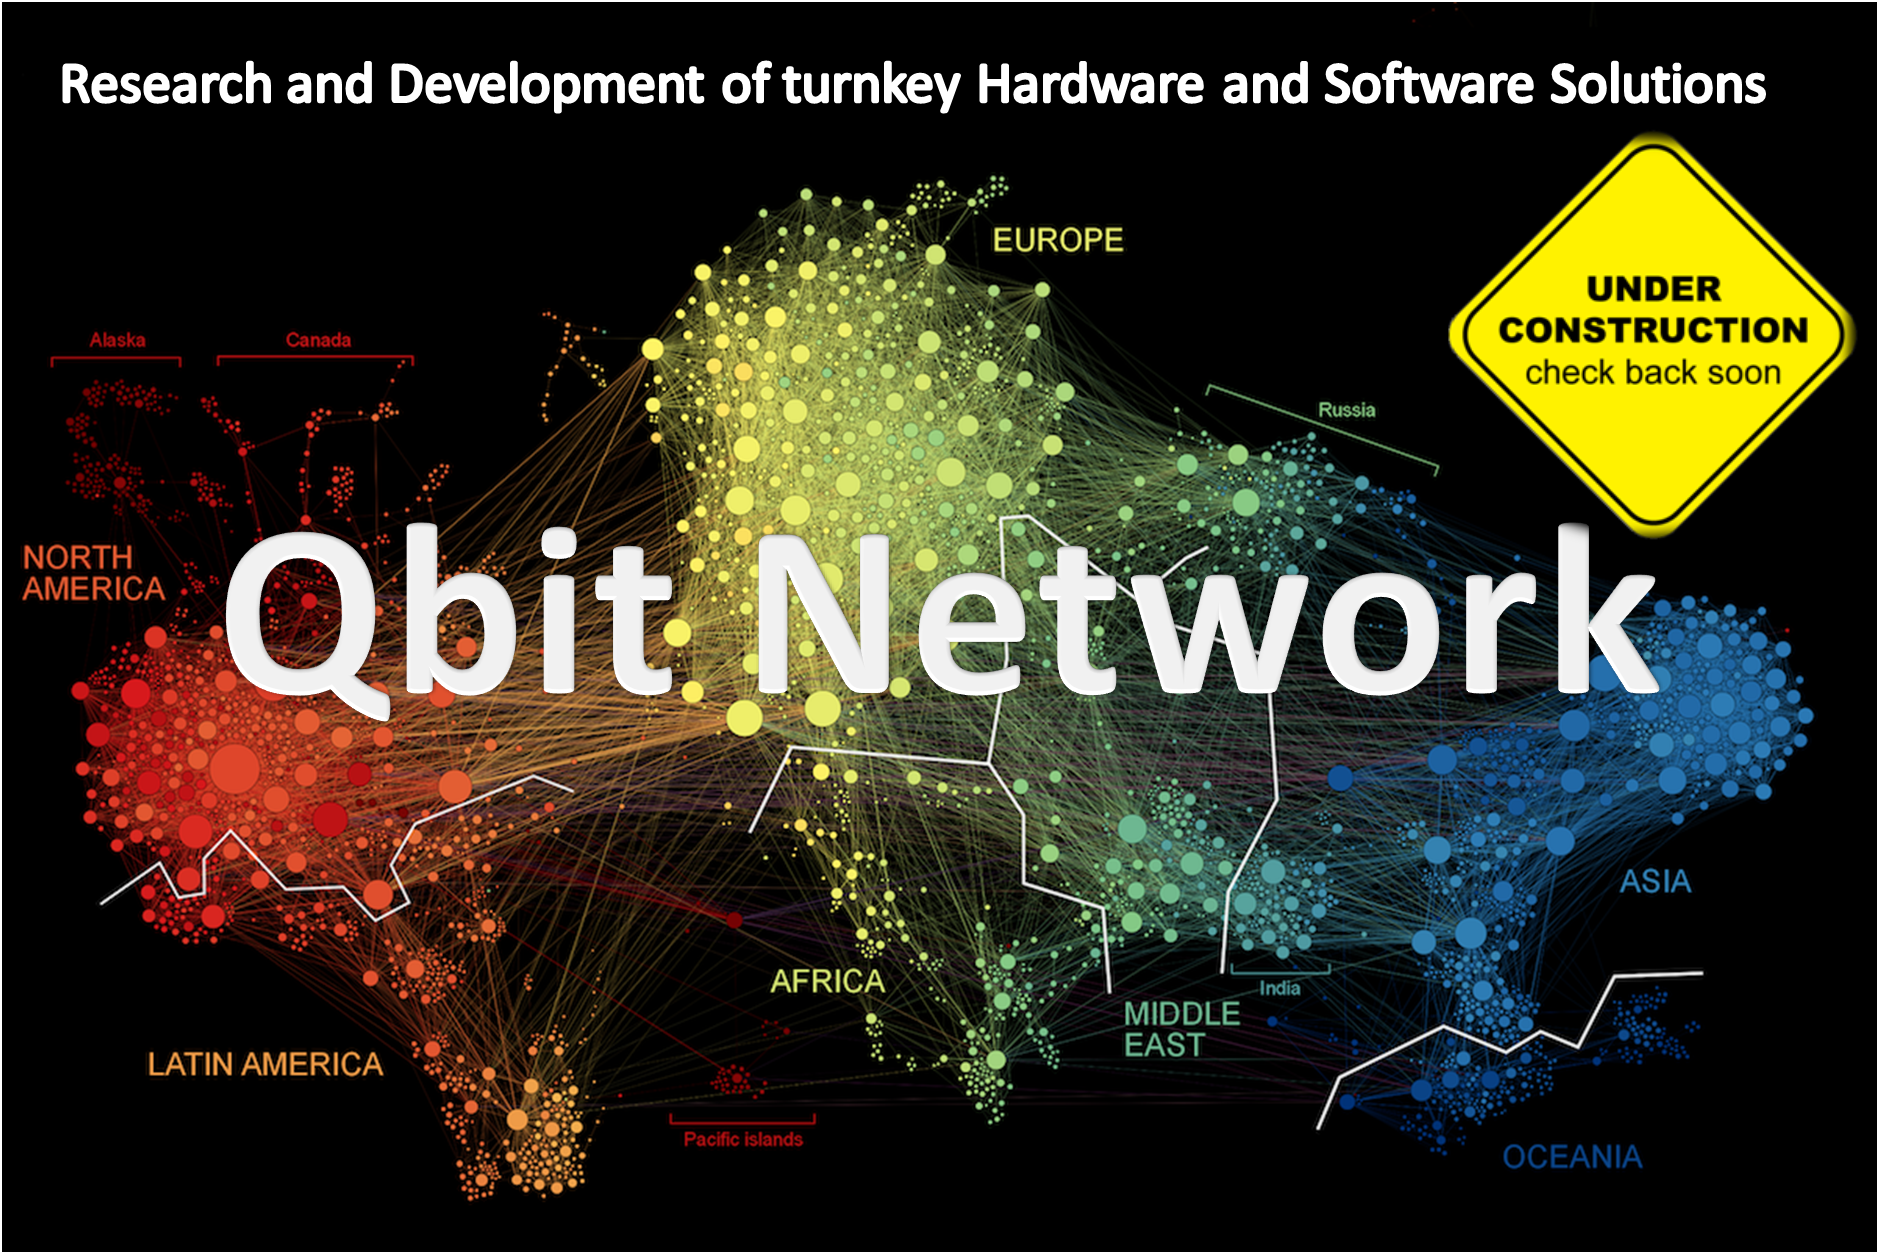 Qbit Network: Research and Development of turnkey Hardware and Software Solutions
